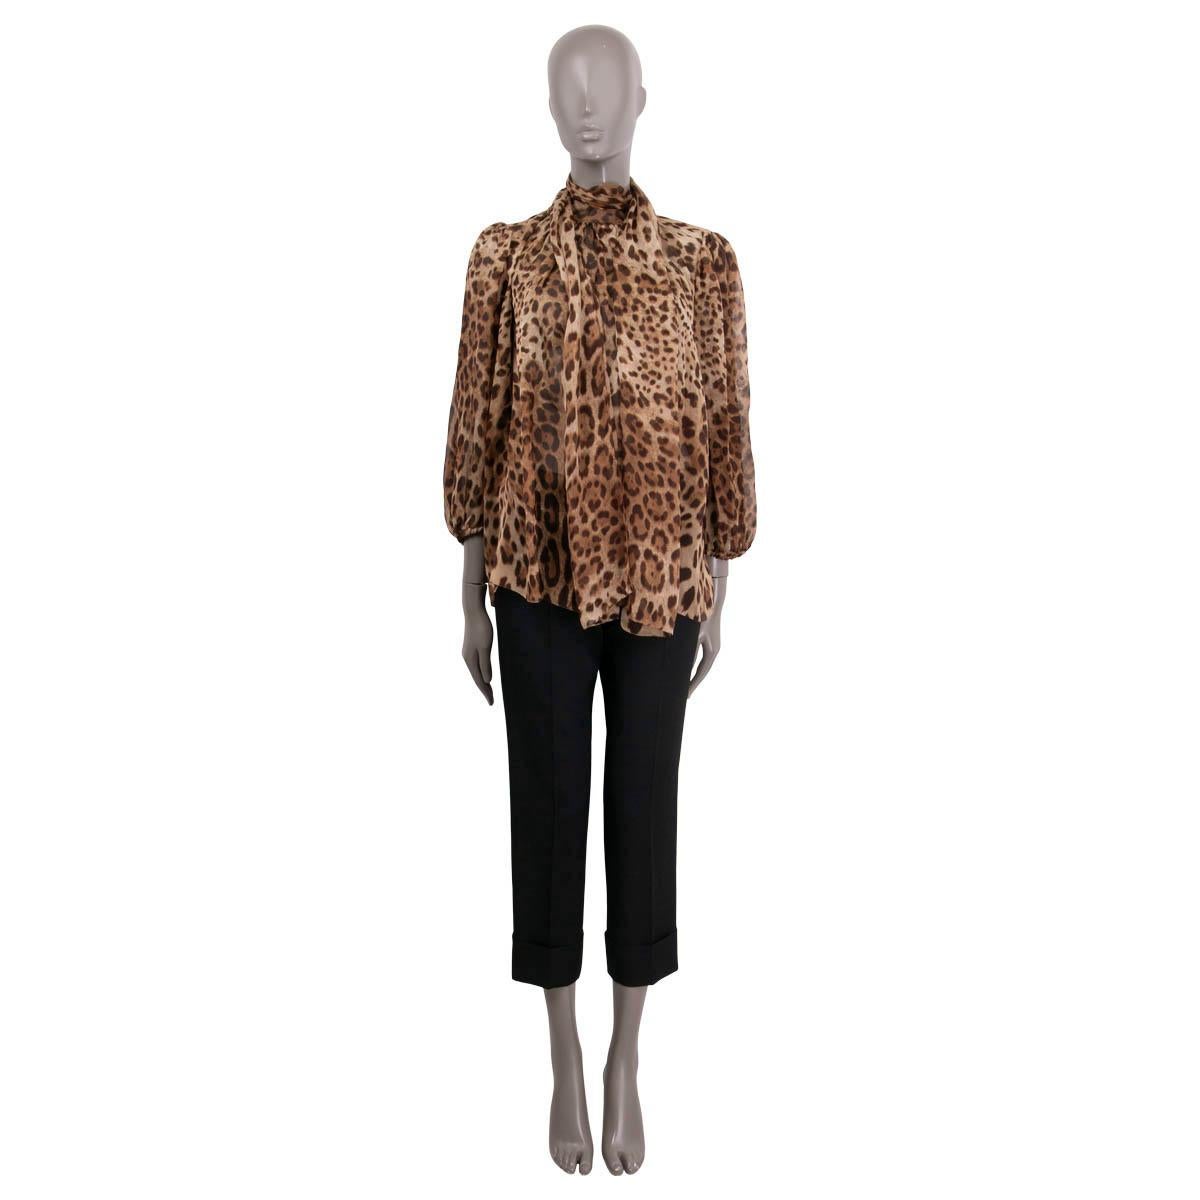 100% authentic Dolce & Gabbana leopard blouse in silk (tag missing) loose fit and a V-neck. Has a self tie pussy-bow that can be worn undone, knotted or draped at the back. Has been worn and is in excellent condition.

Measurements
Tag